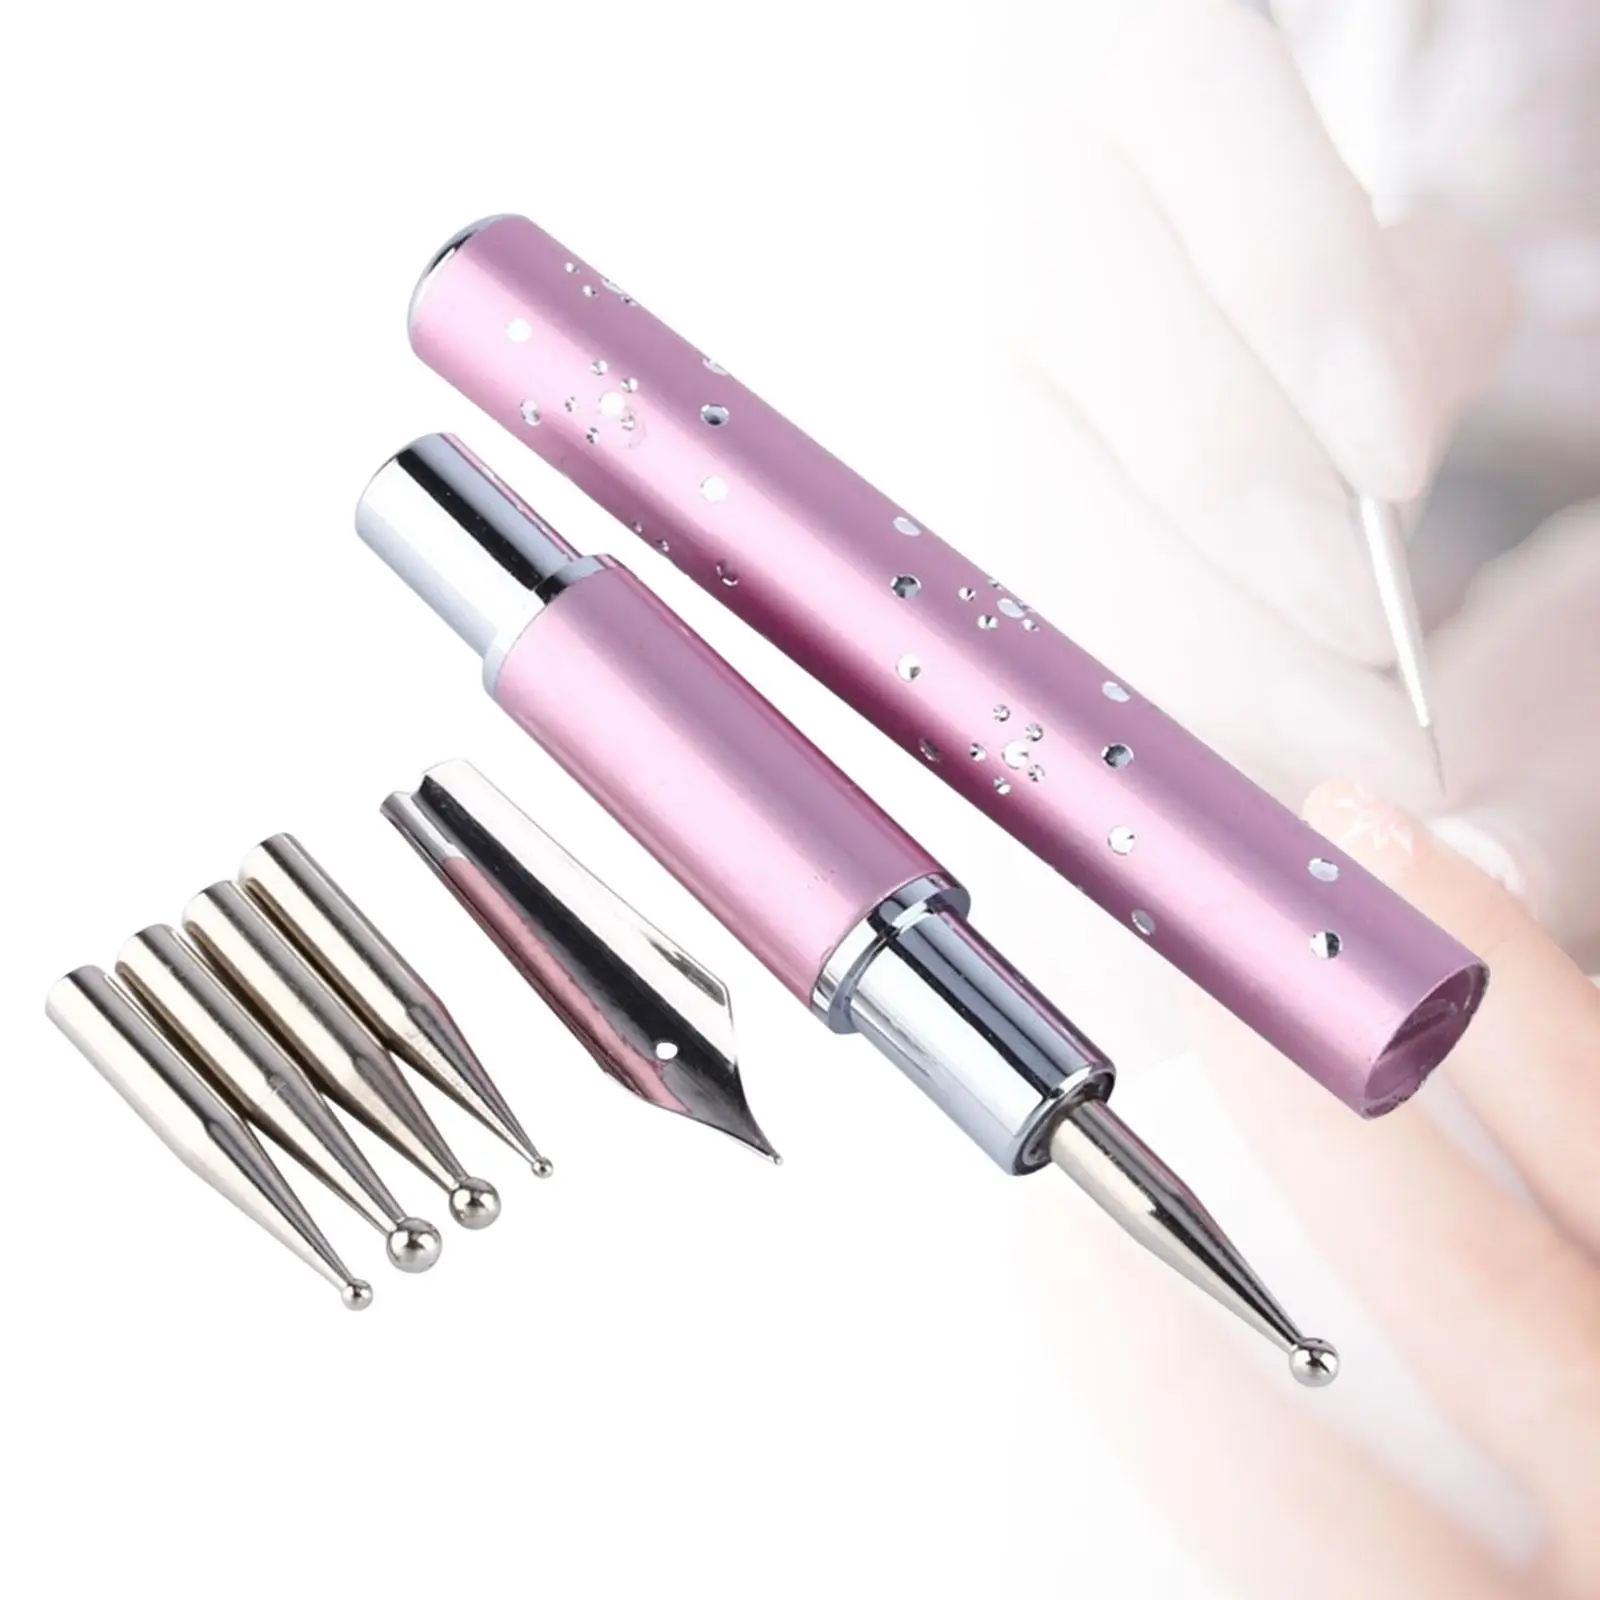 Nail Art Fountain Pen Brush with 5 Replacement Heads Professional Drawing Pen Nail Art Paint Pen Dotting Liner Tool for Salon